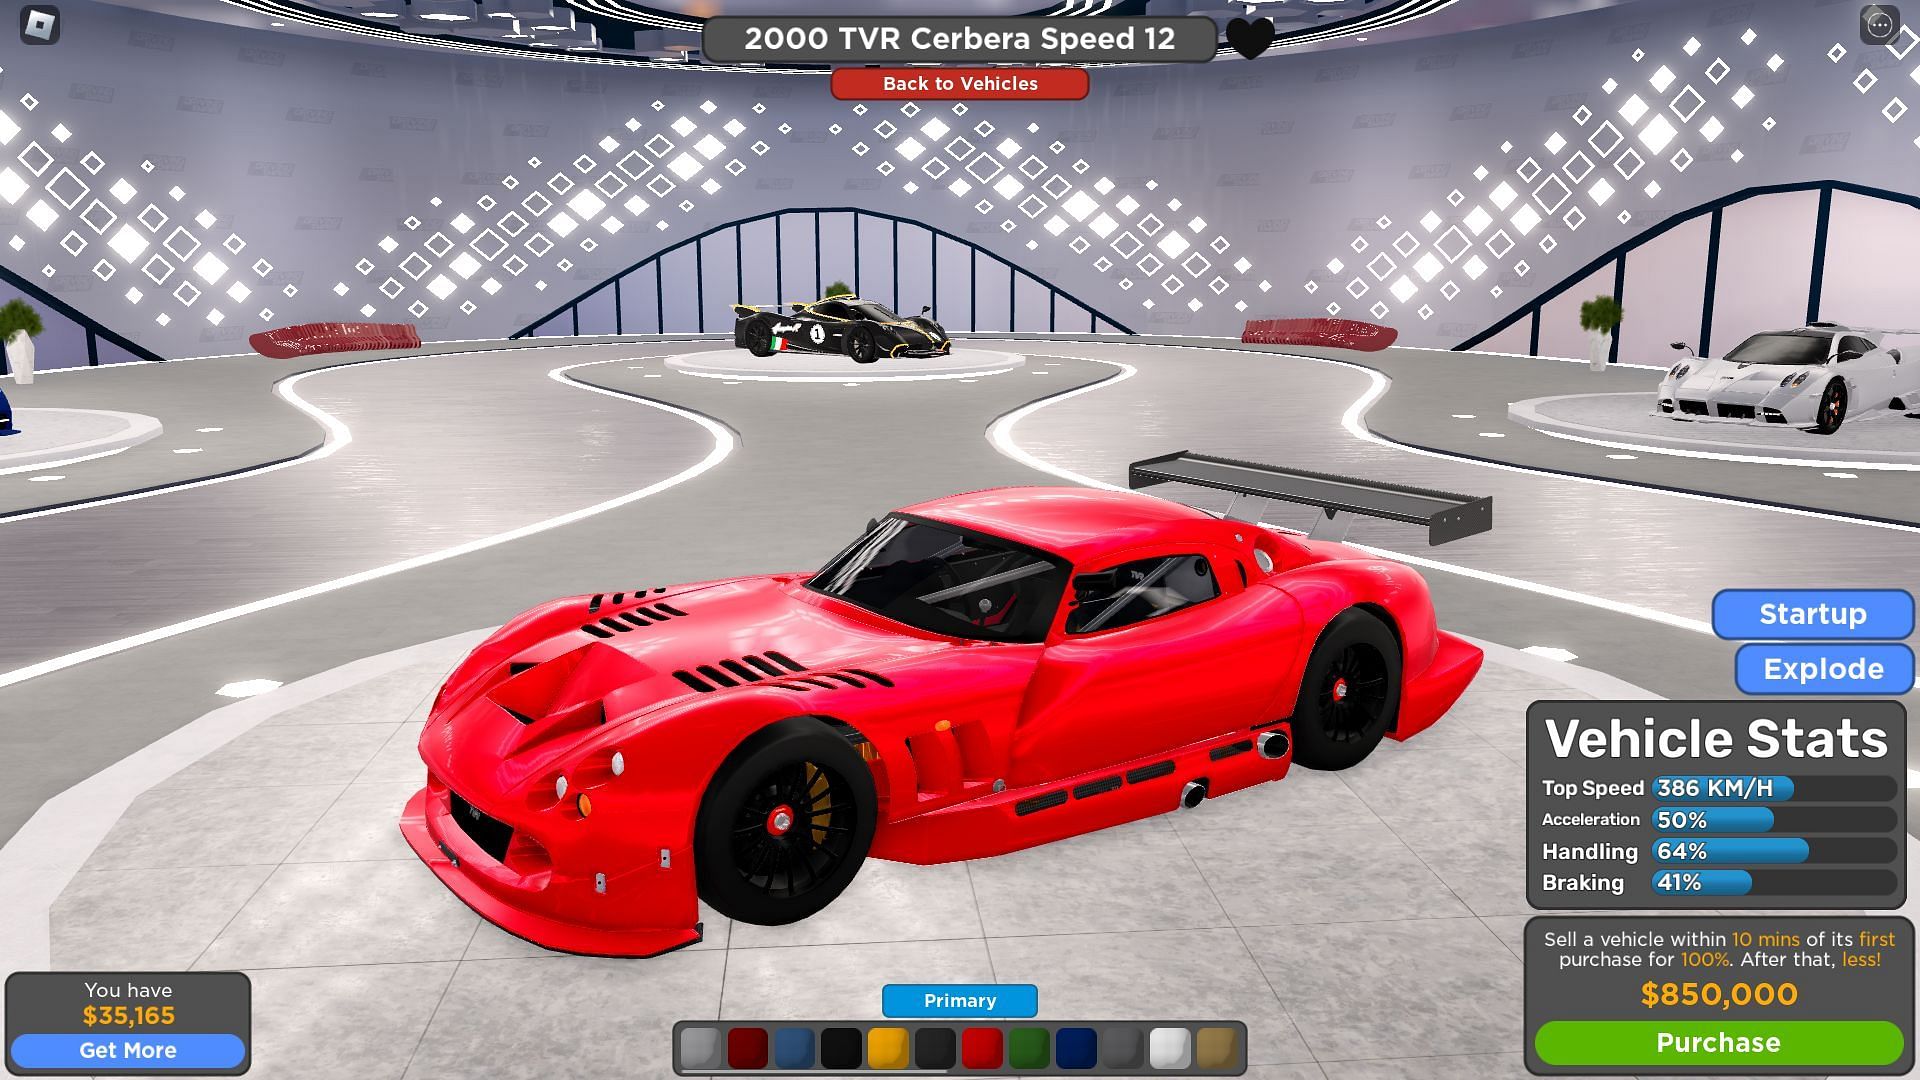 Speed 12 is an amazing car in the game (Image via Roblox)